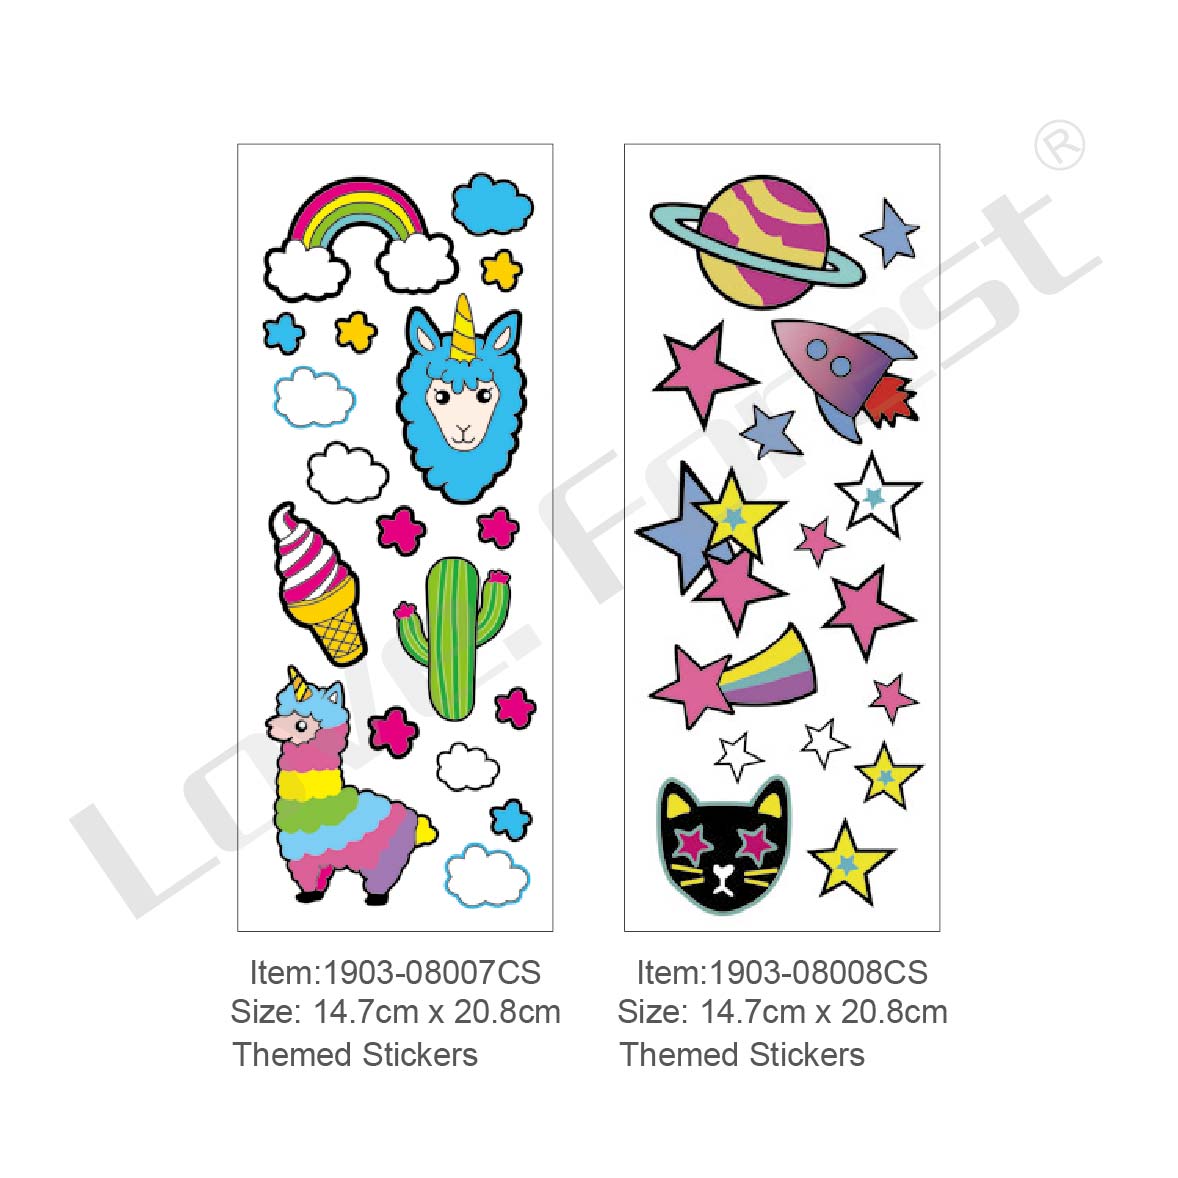 THEMED STICKERS